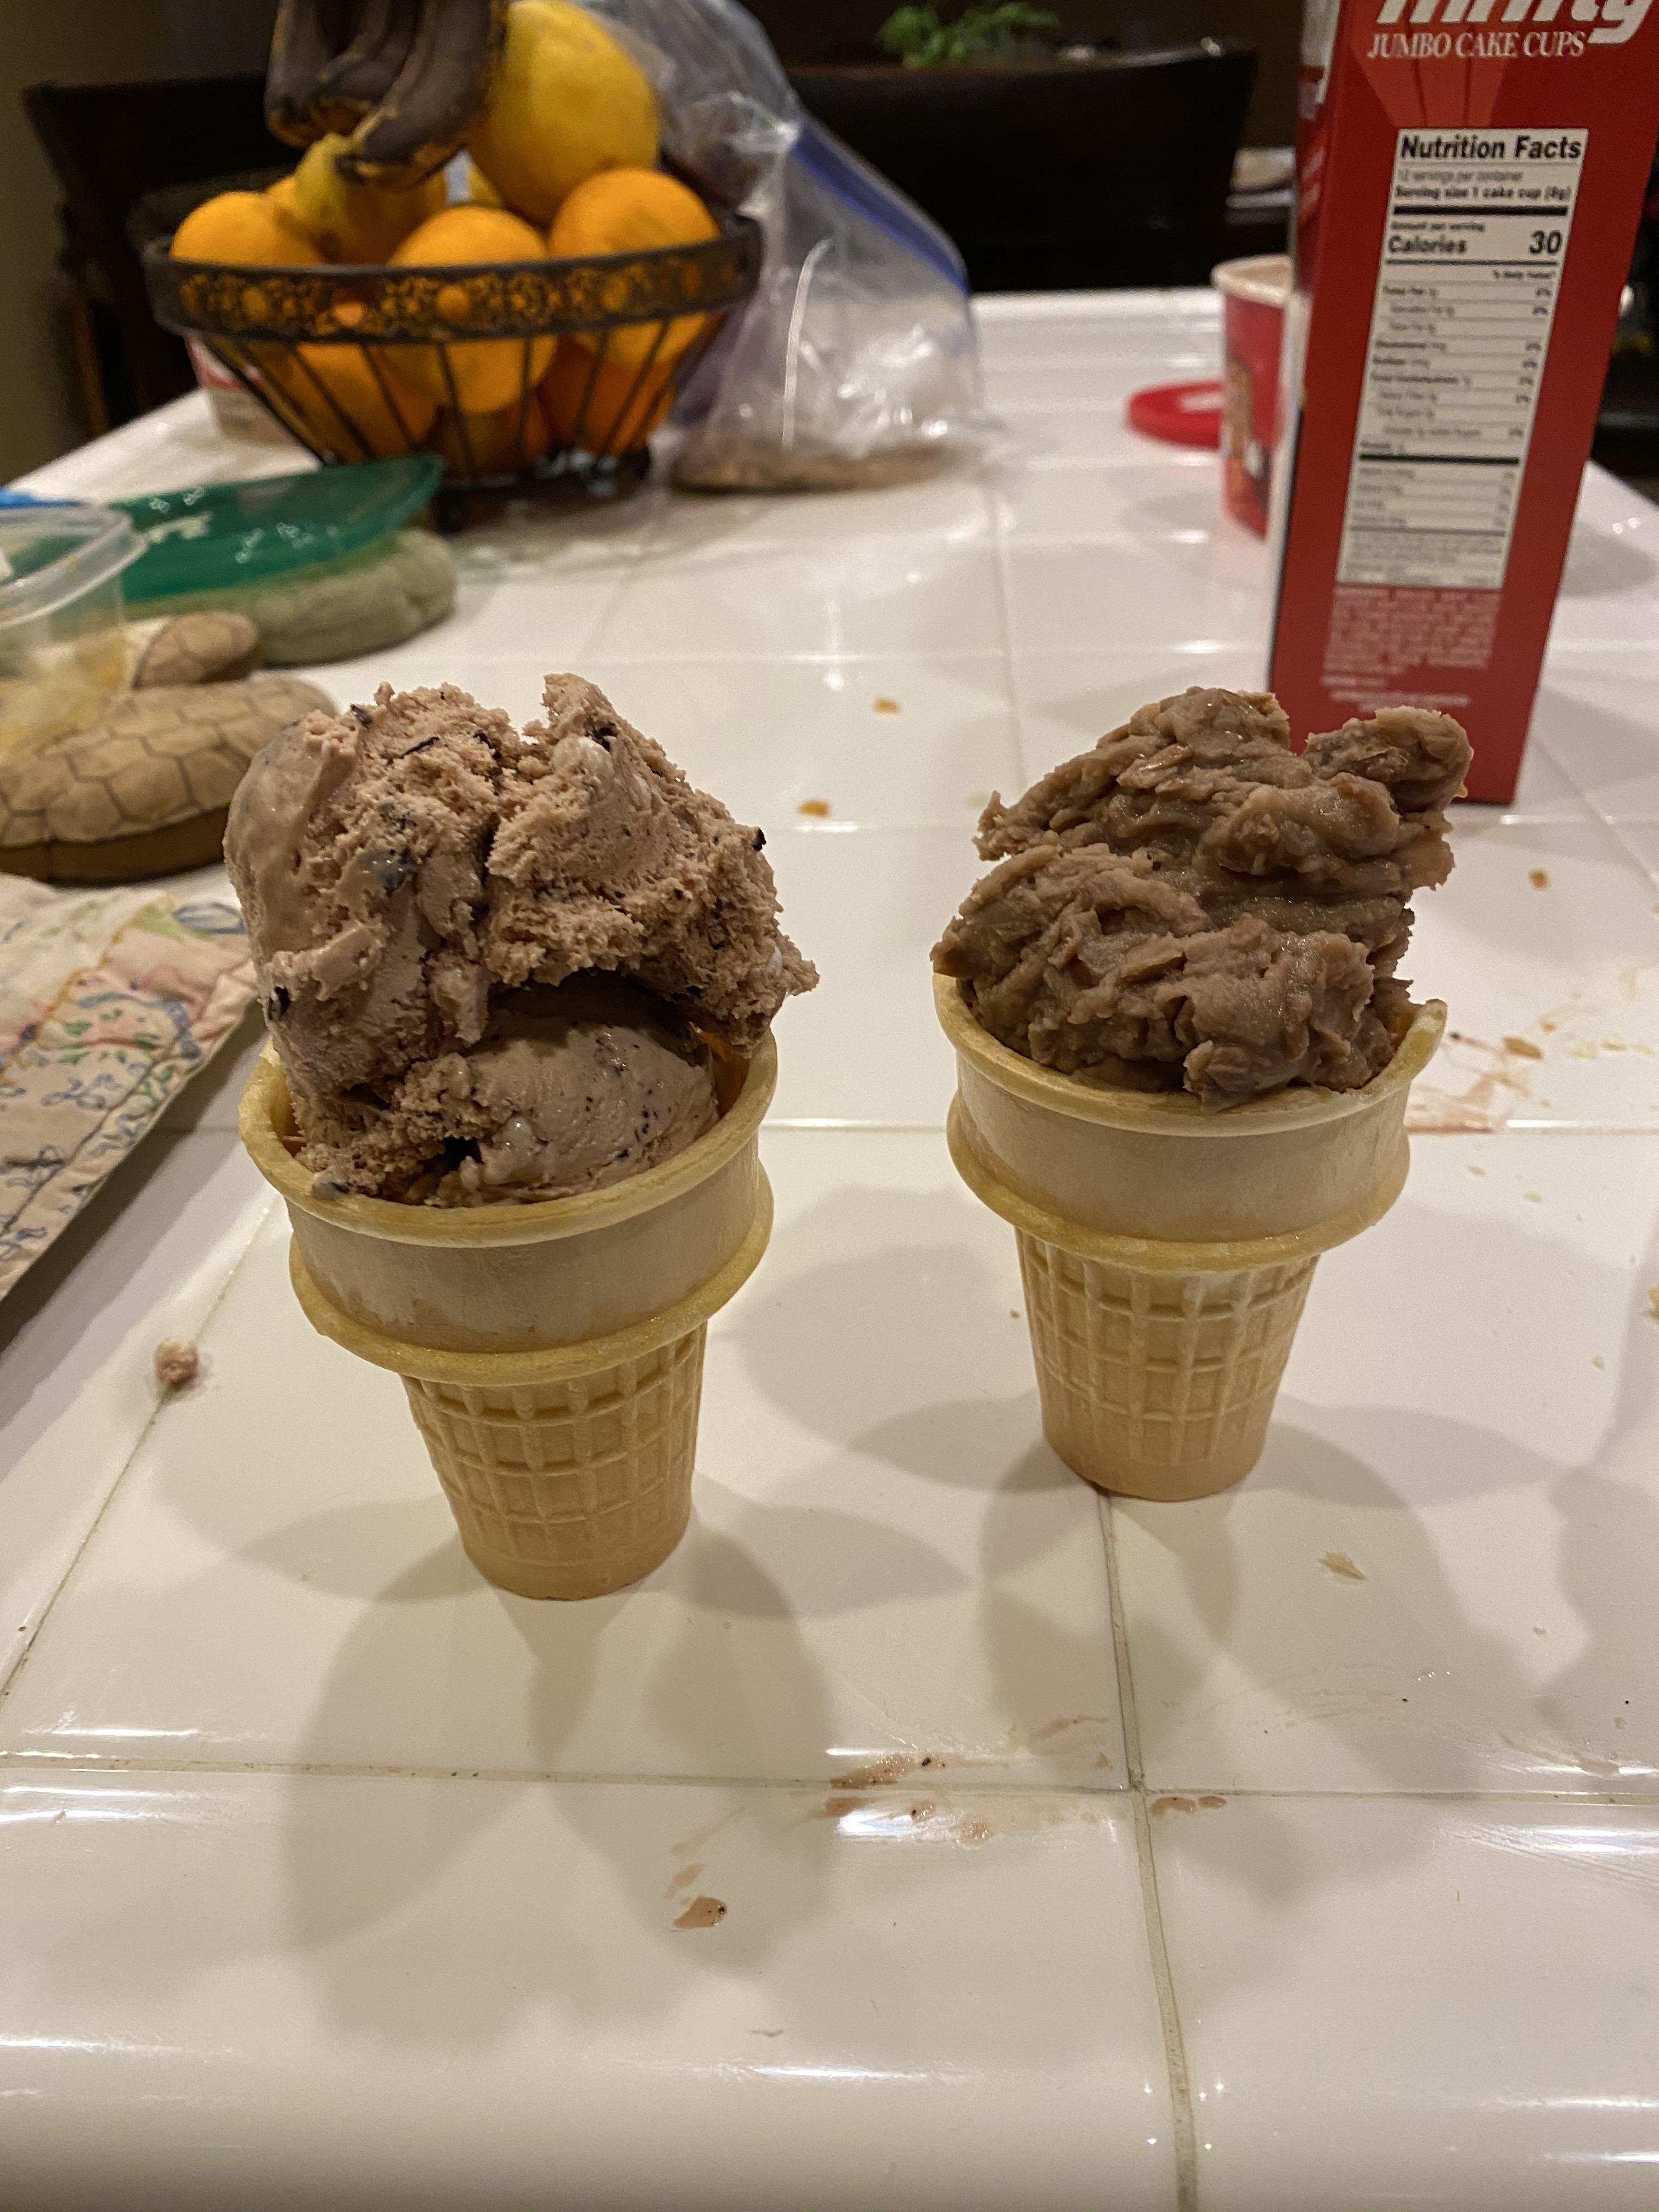 Wife asked for ice cream. Hers is beans. I’m a terrible person